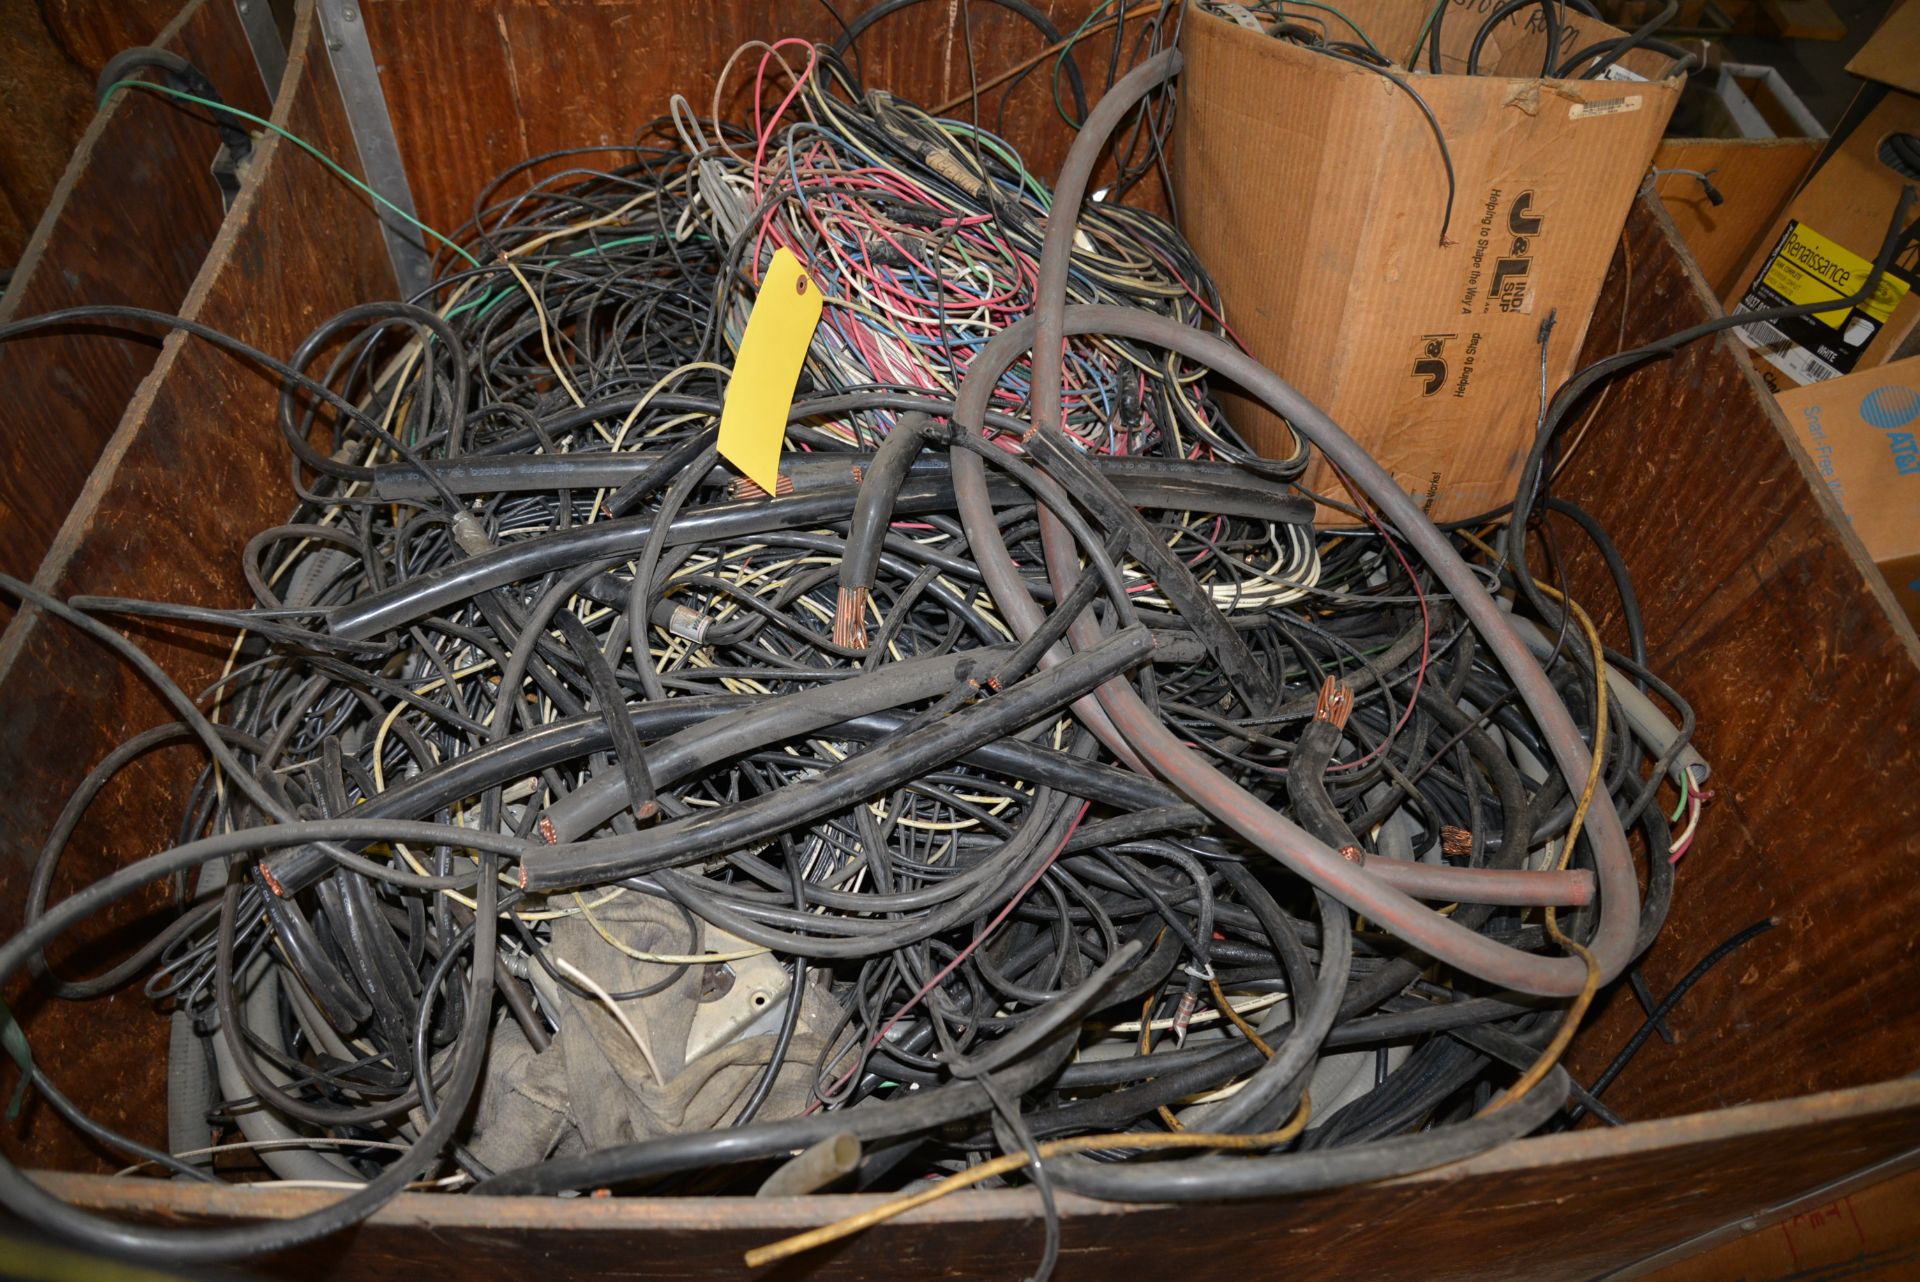 ASSORTED ELECTRICAL CORD